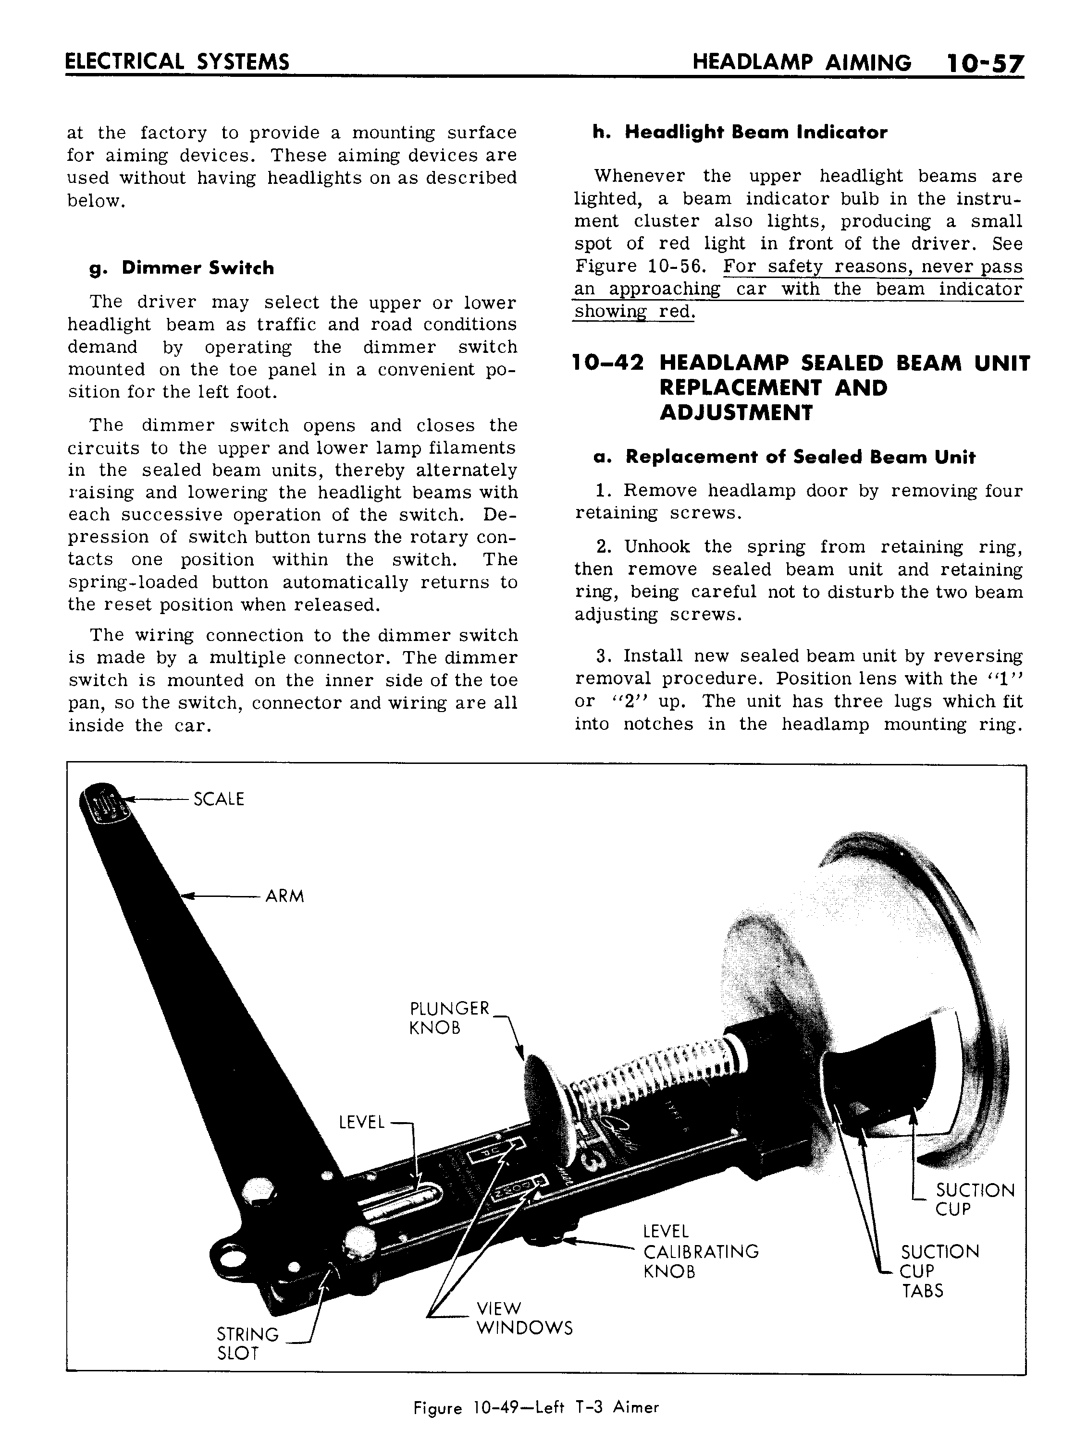 n_10 1961 Buick Shop Manual - Electrical Systems-057-057.jpg